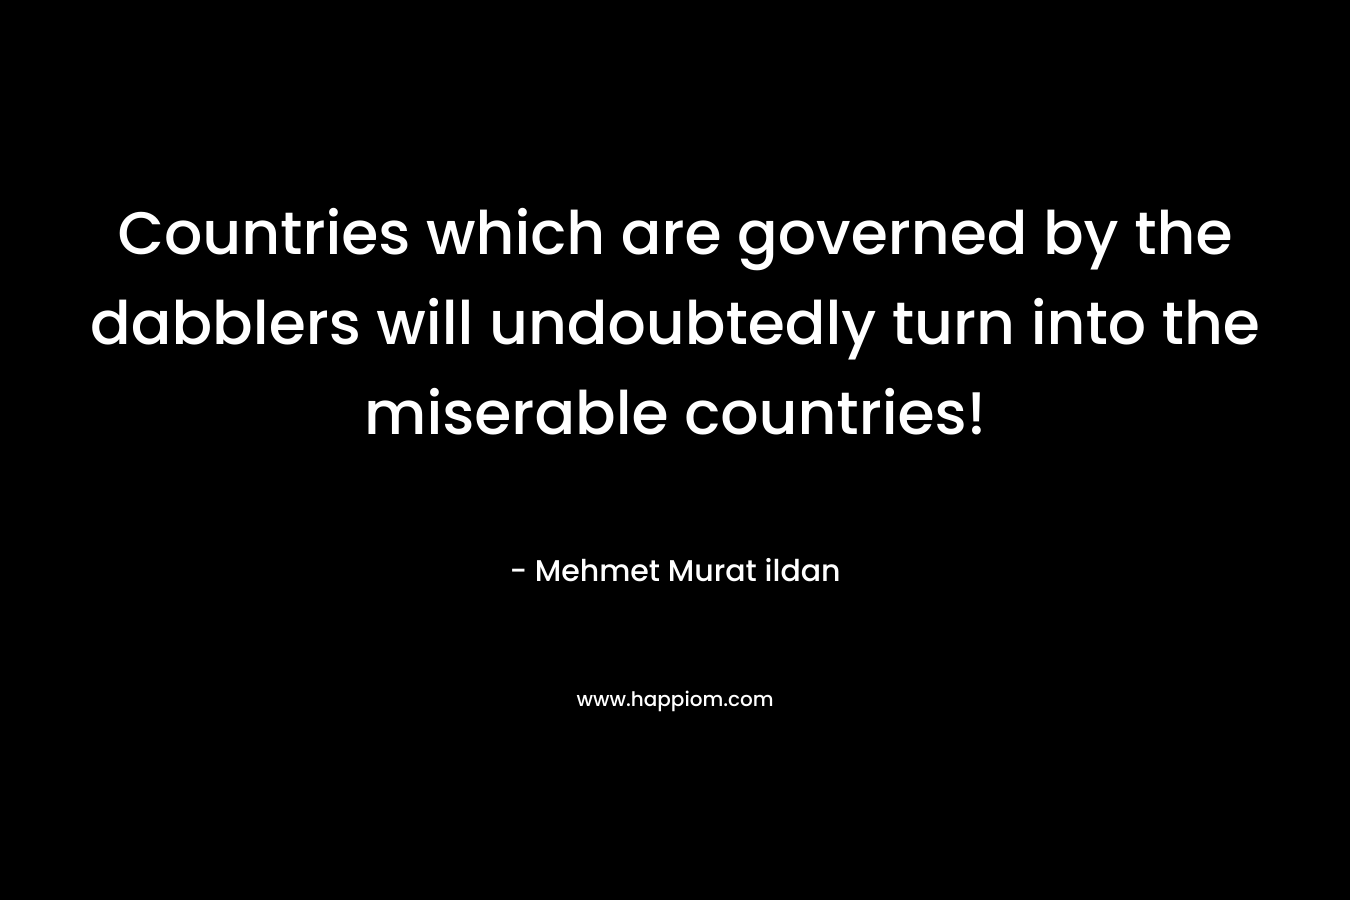 Countries which are governed by the dabblers will undoubtedly turn into the miserable countries! – Mehmet Murat ildan